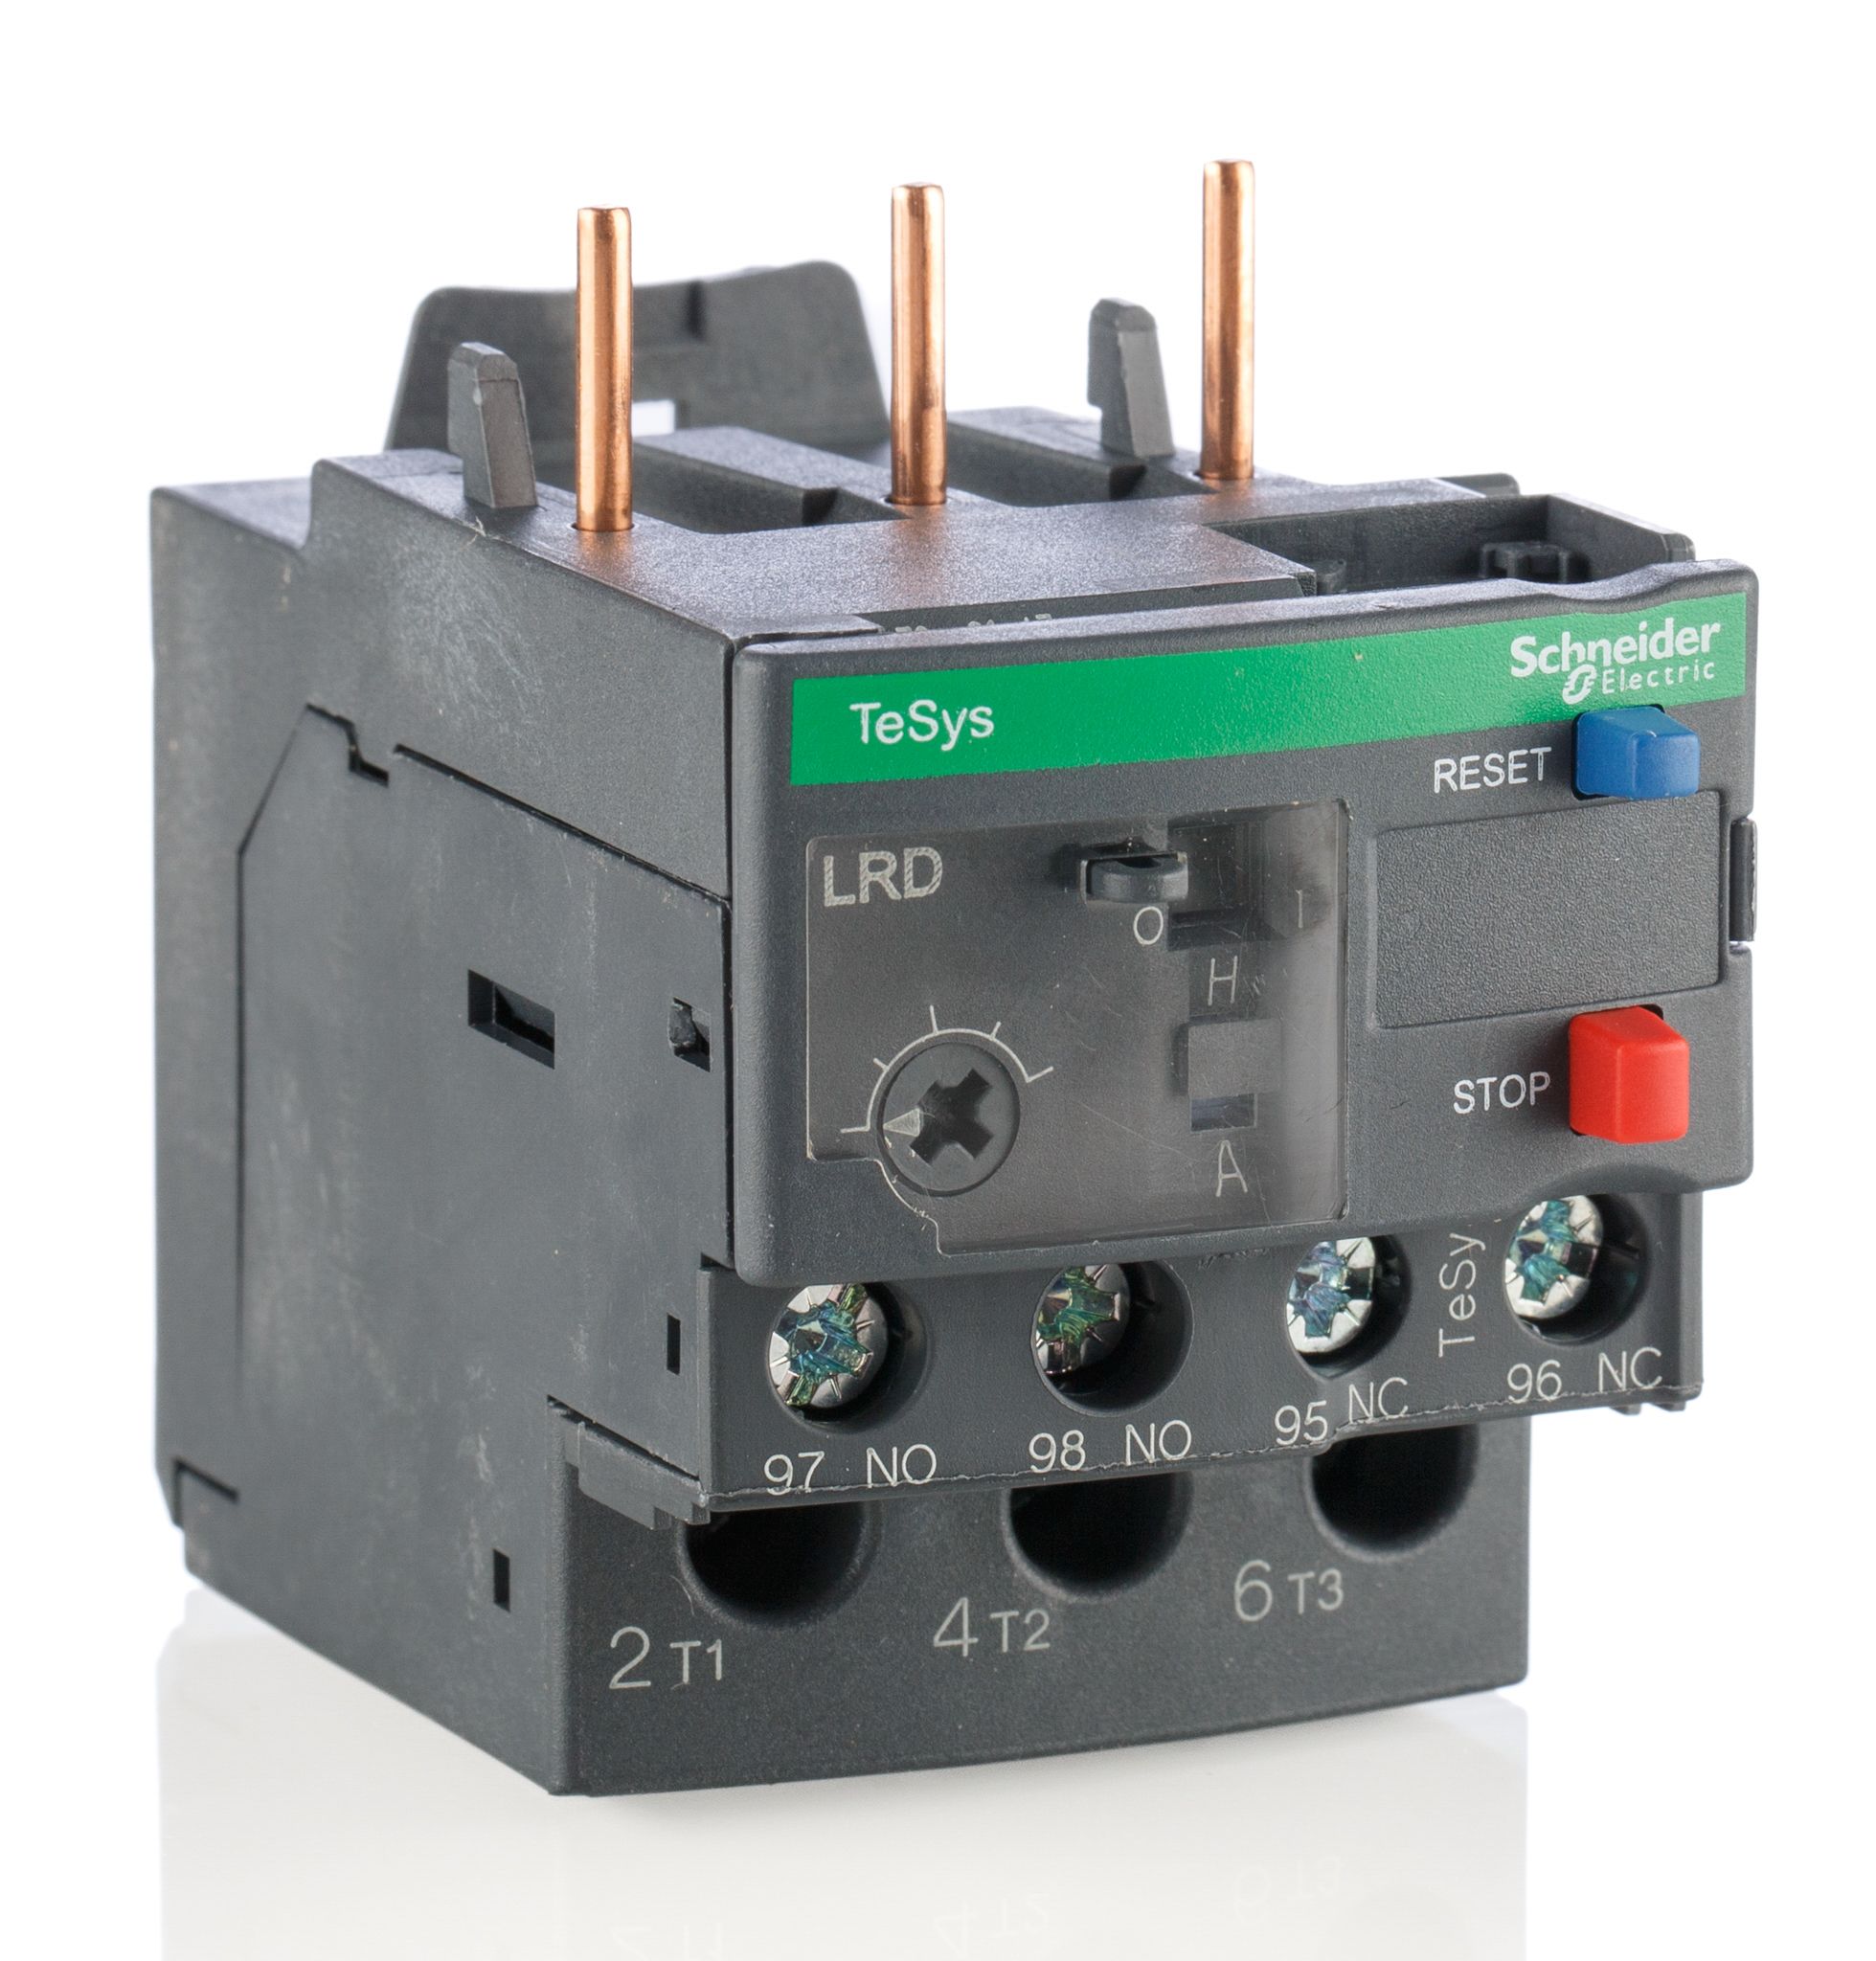 Schneider Electric Thermal Overload Relay - 1NO + 1NC, 12 → 18 A F.L.C, 18 A Contact Rating, 3P, TeSys